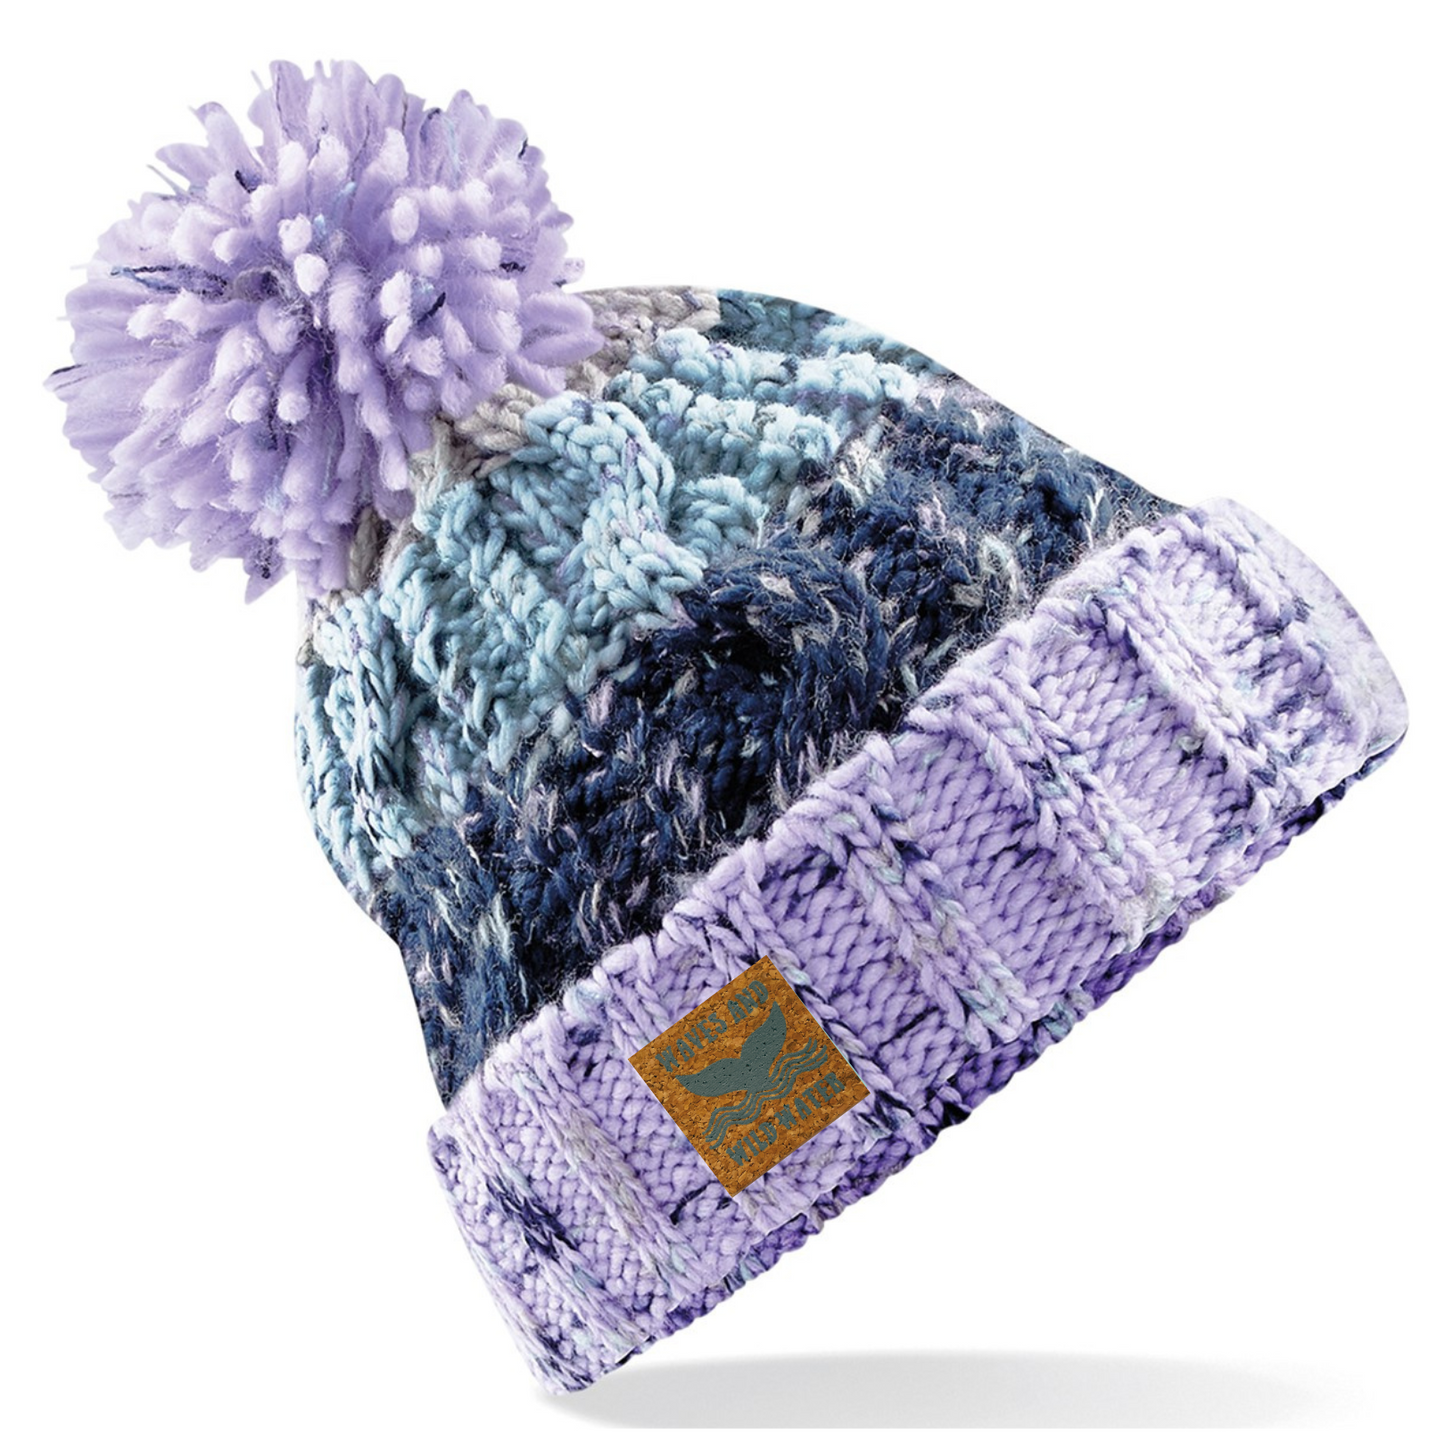 This hat is knitted in different shades of lilac, purple and blue. It has a deep fold up cuff which proudly displays the vegan leather Waves and Wild Water label. Finished with a fun fluffy pom pom, this hat is not only practical for keeping your head warm after a wild swim, it also looks great too. 